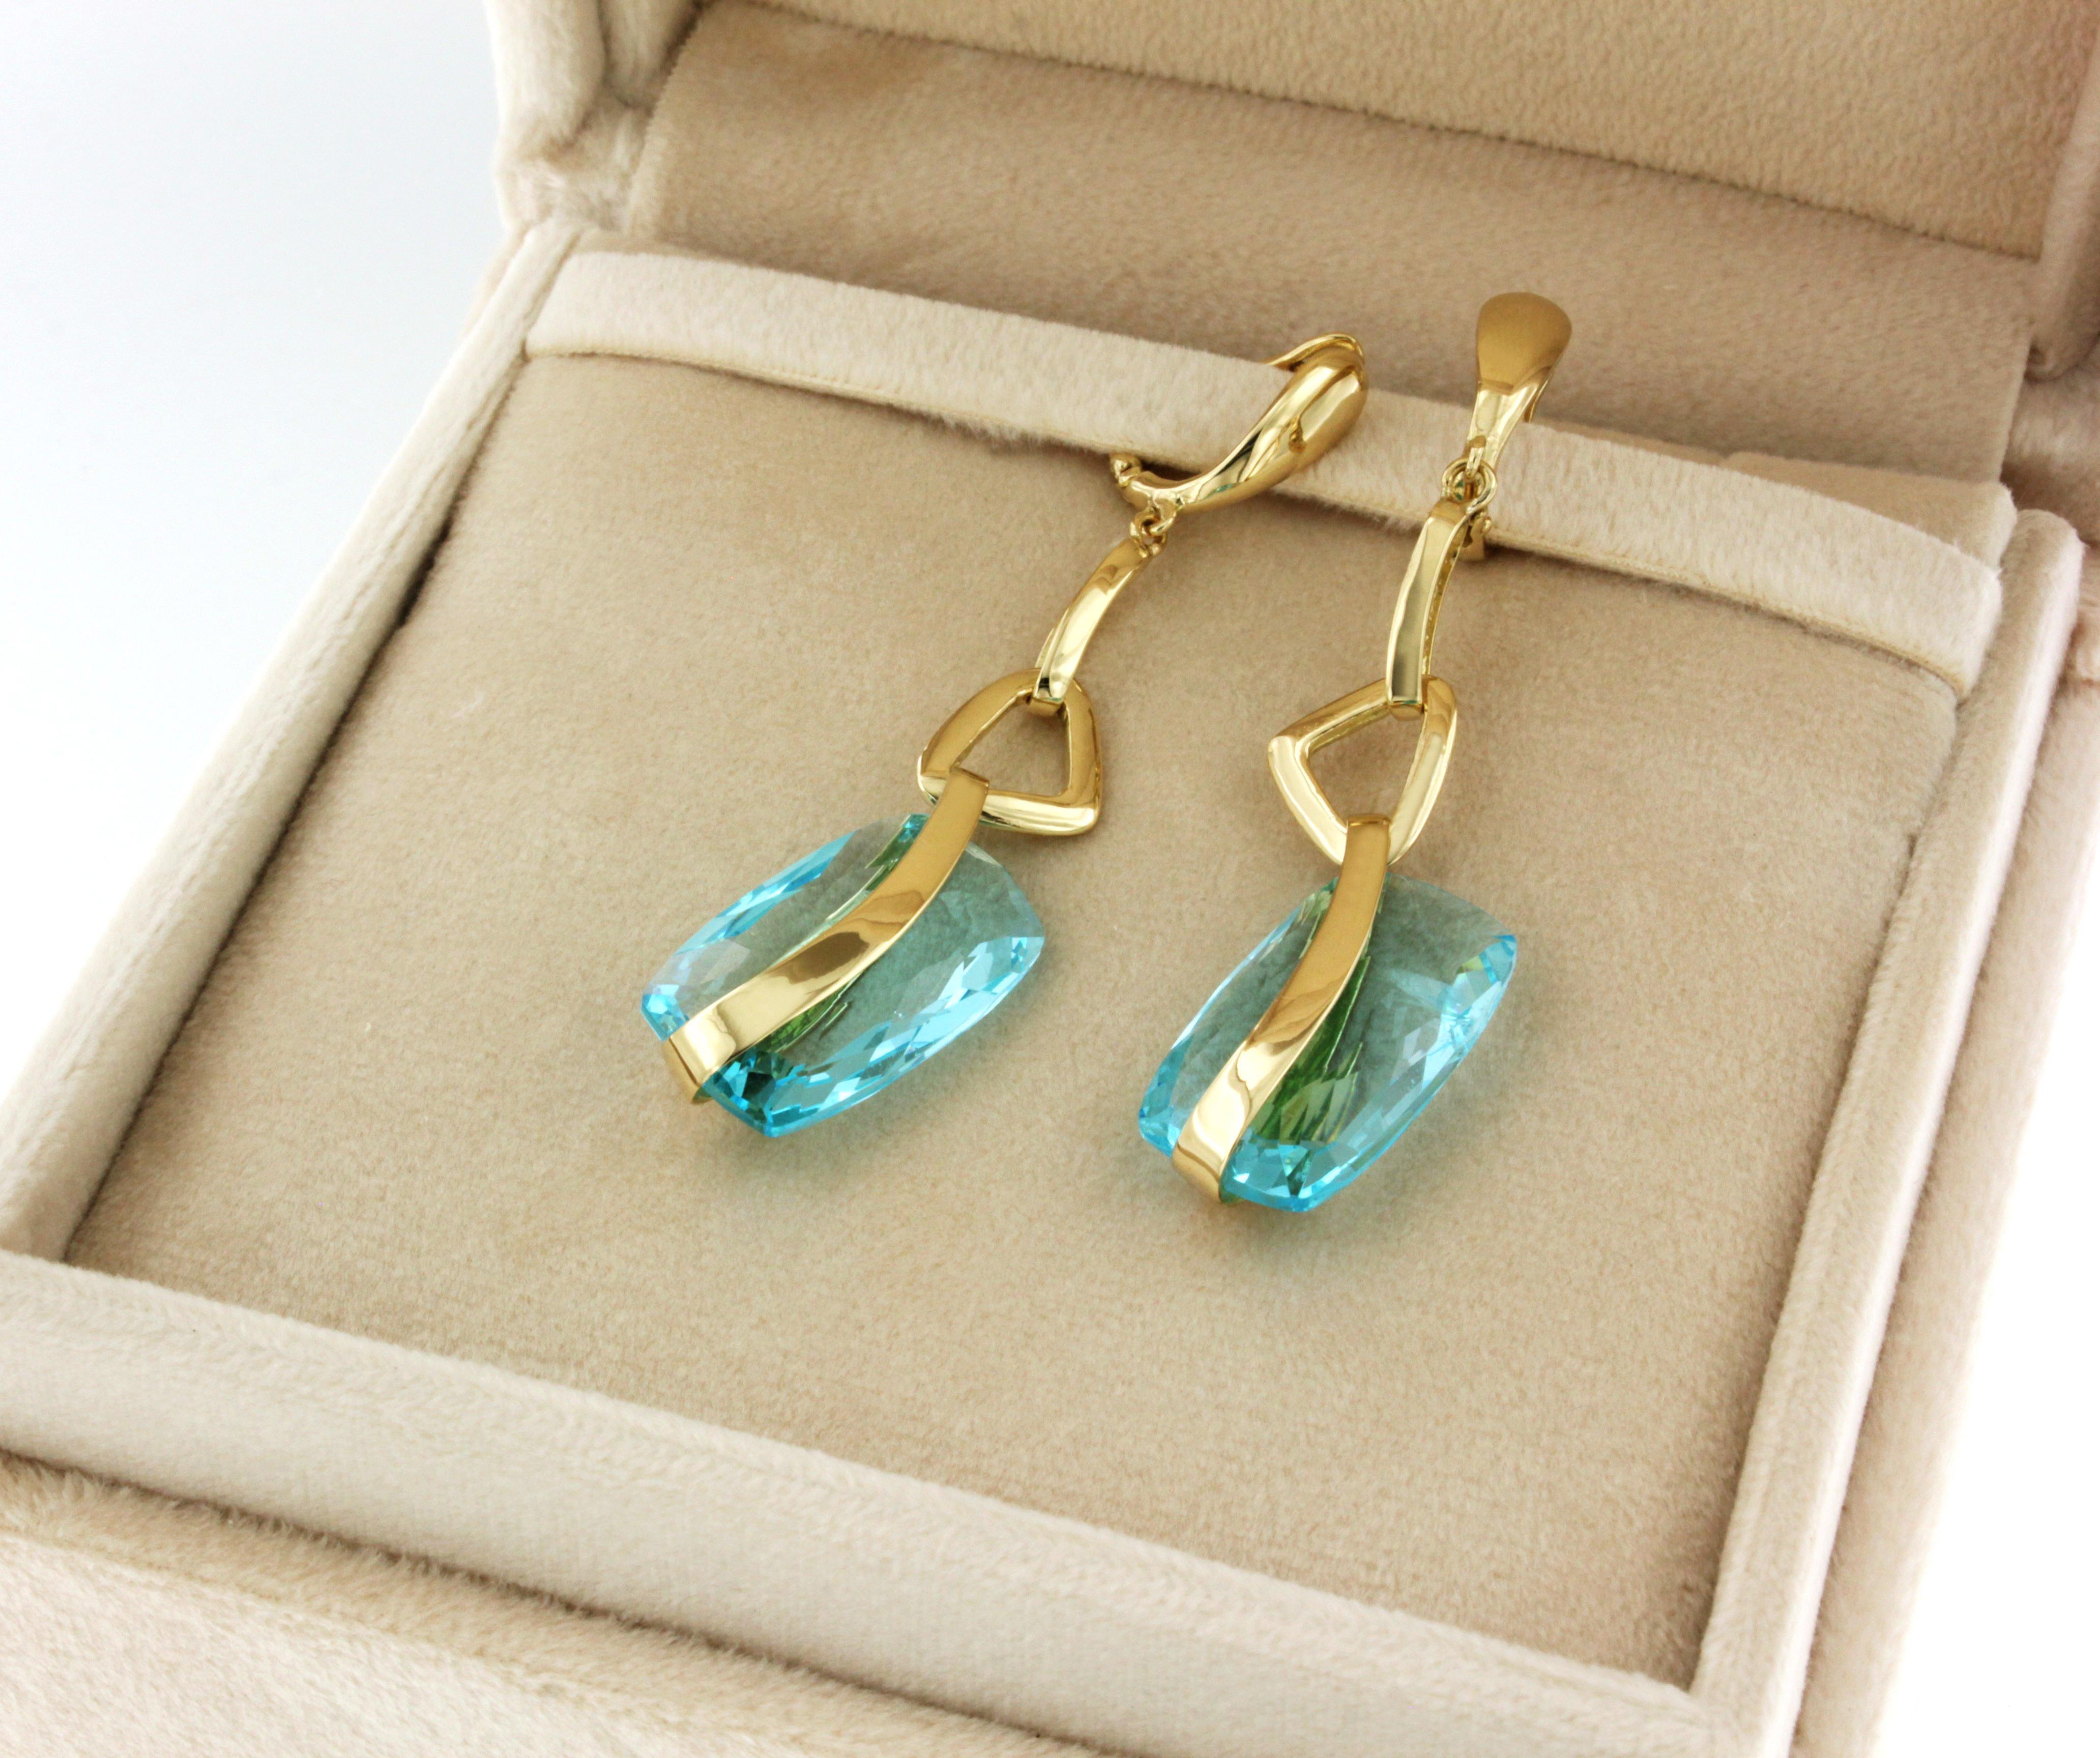 Square Cut 18 Karat Yellow Gold with Blue Topaz Earrings